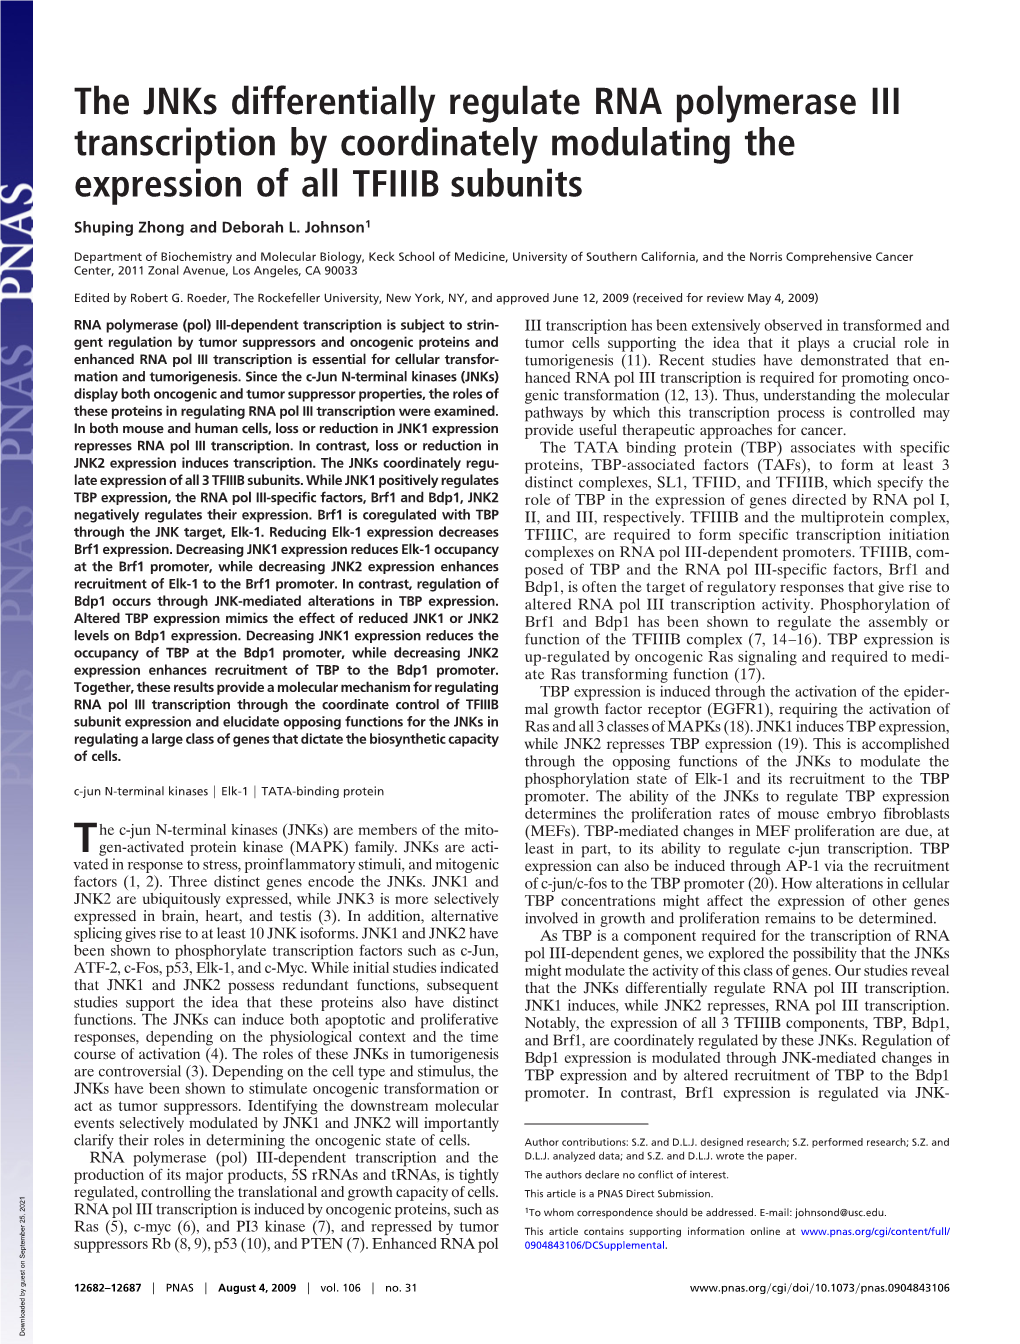 The Jnks Differentially Regulate RNA Polymerase III Transcription by Coordinately Modulating the Expression of All TFIIIB Subunits